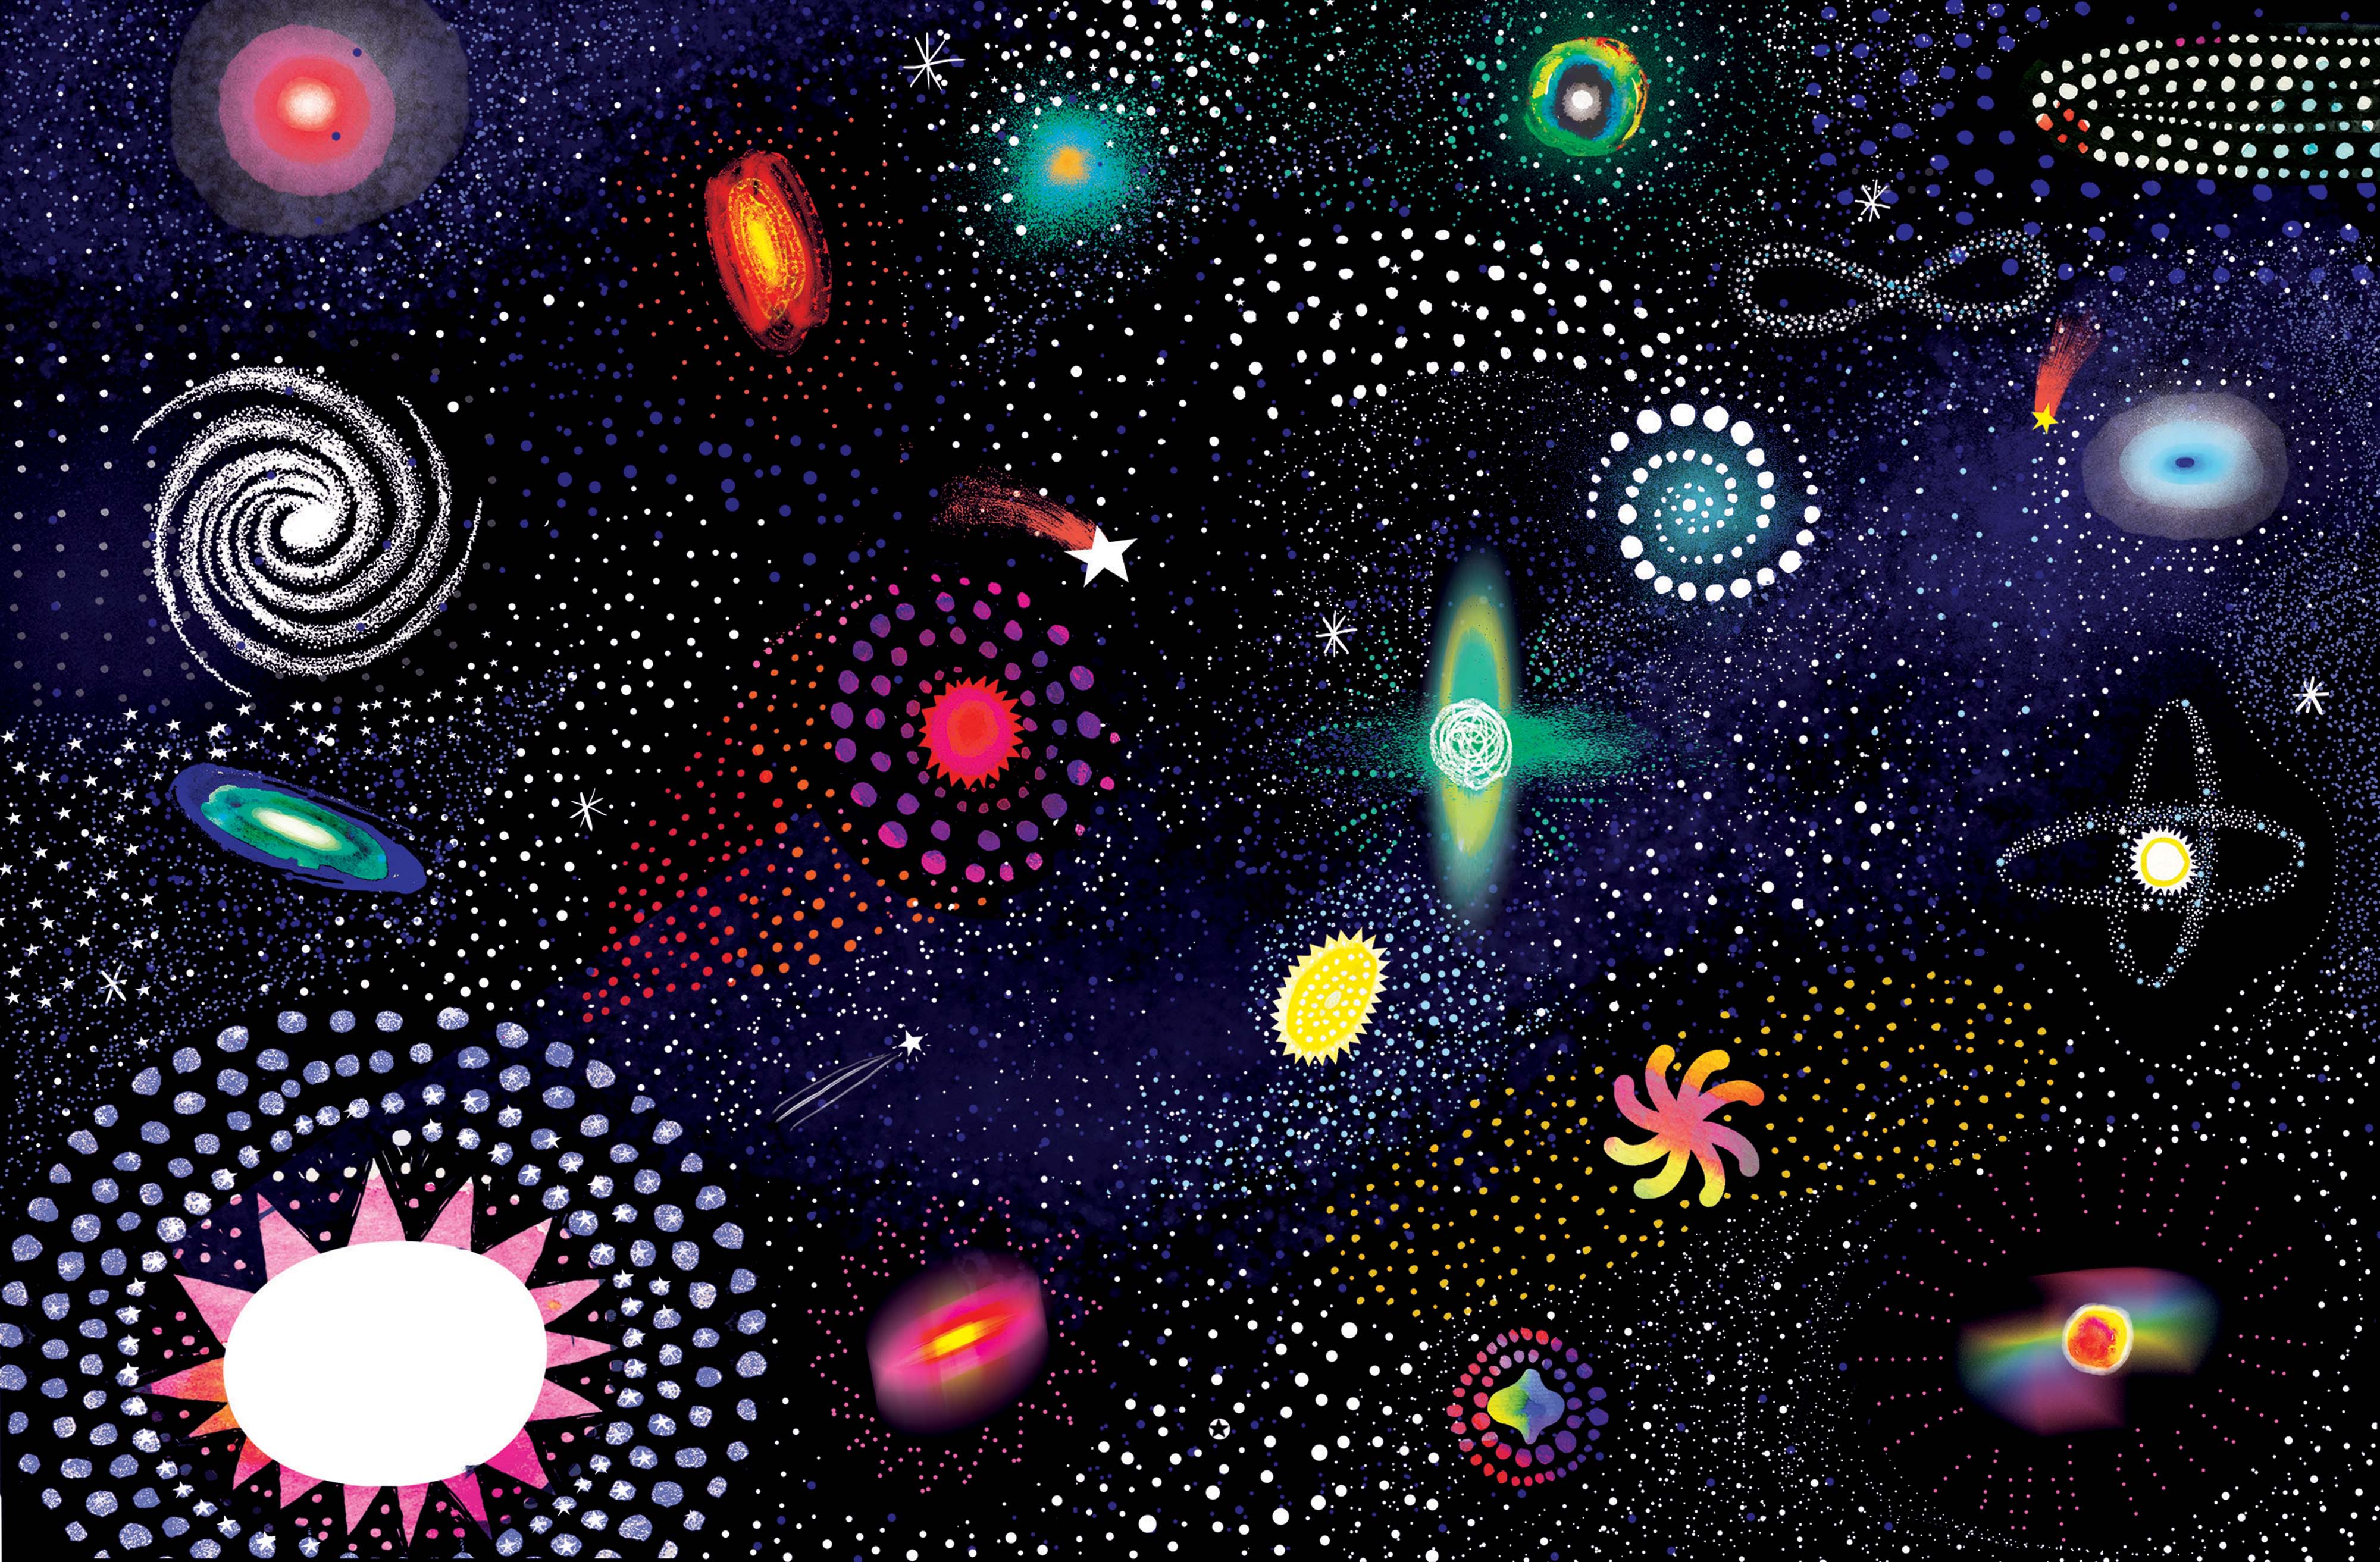 A colourful universe, with different sized galaxies and stars, painted with dots